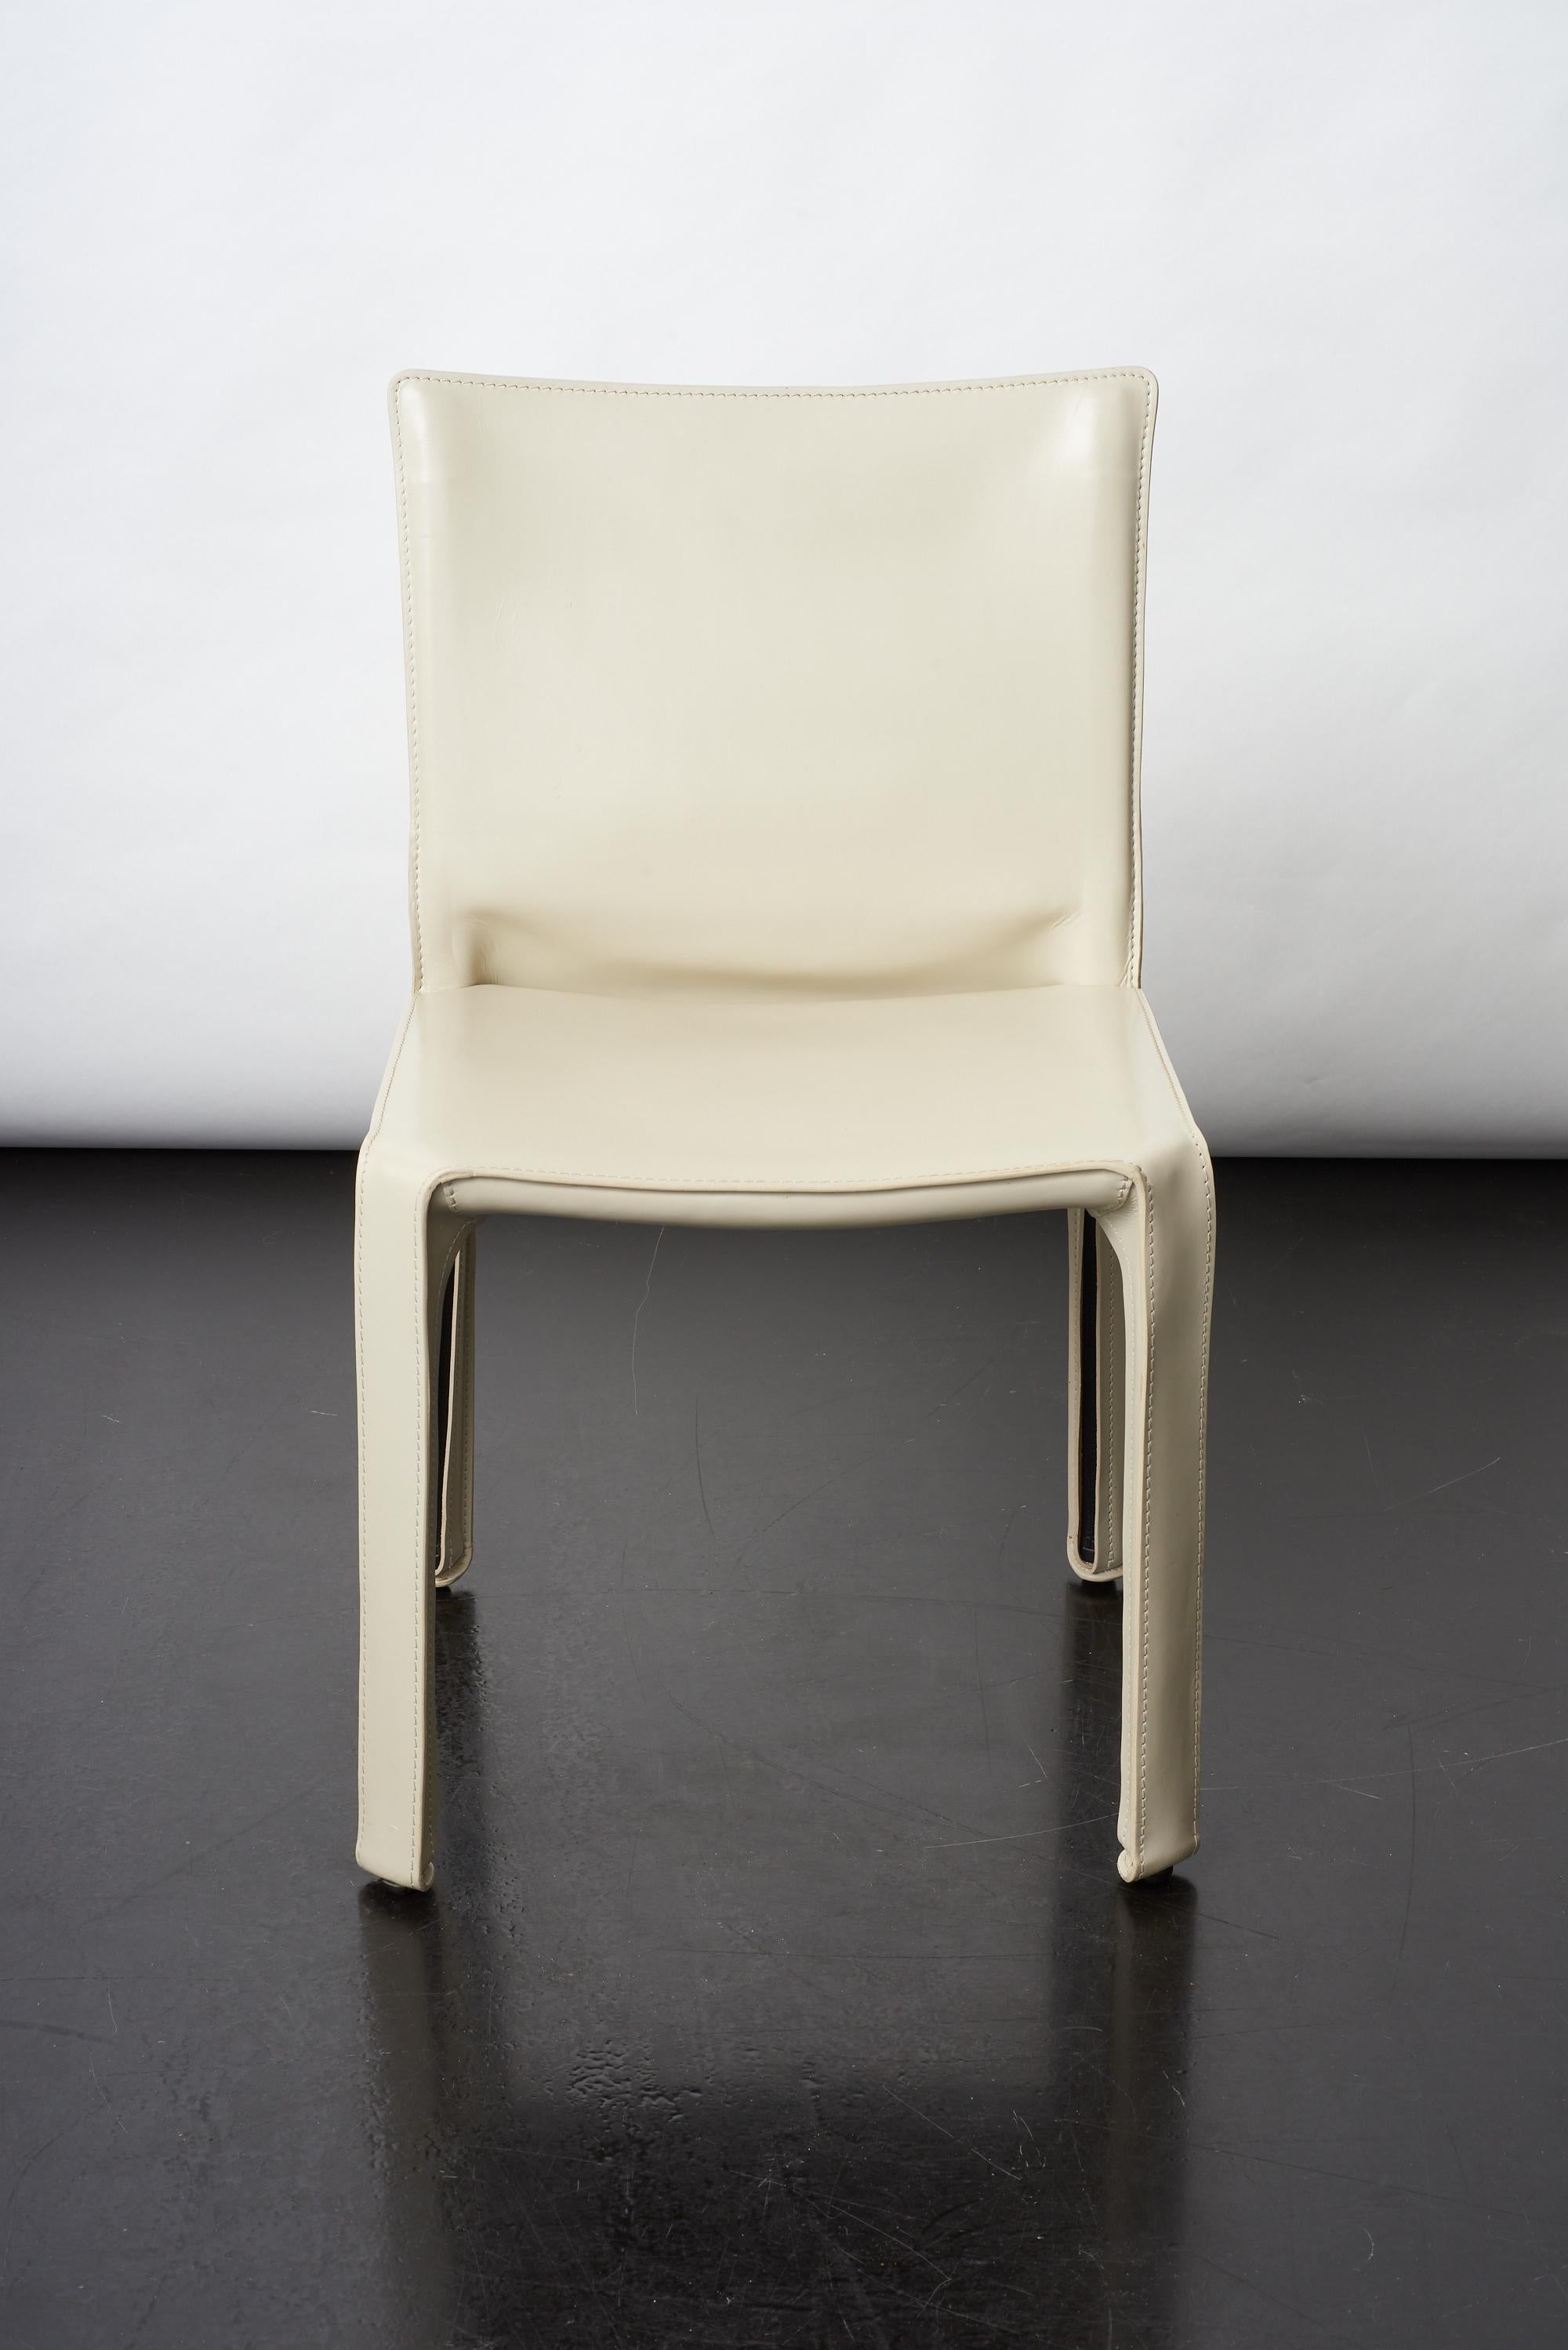 Modern Cab 412 Chair by Mario Bellini for Cassina